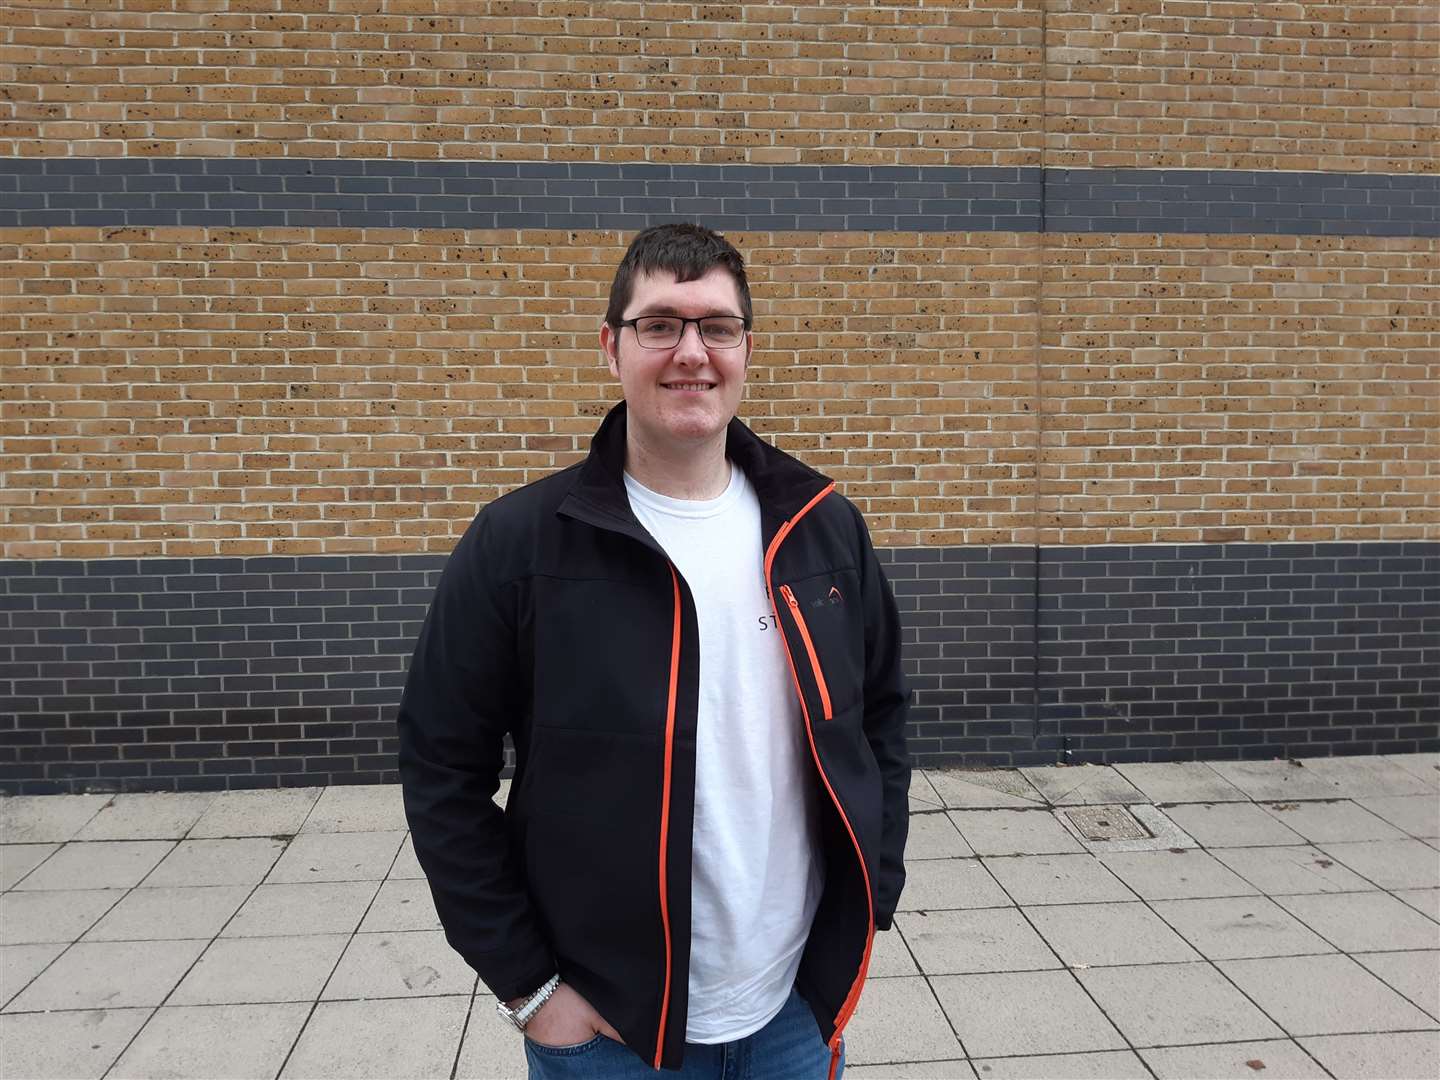 Chris Shortall, 28, from Sittingbourne, visited Cineworld on it's final day